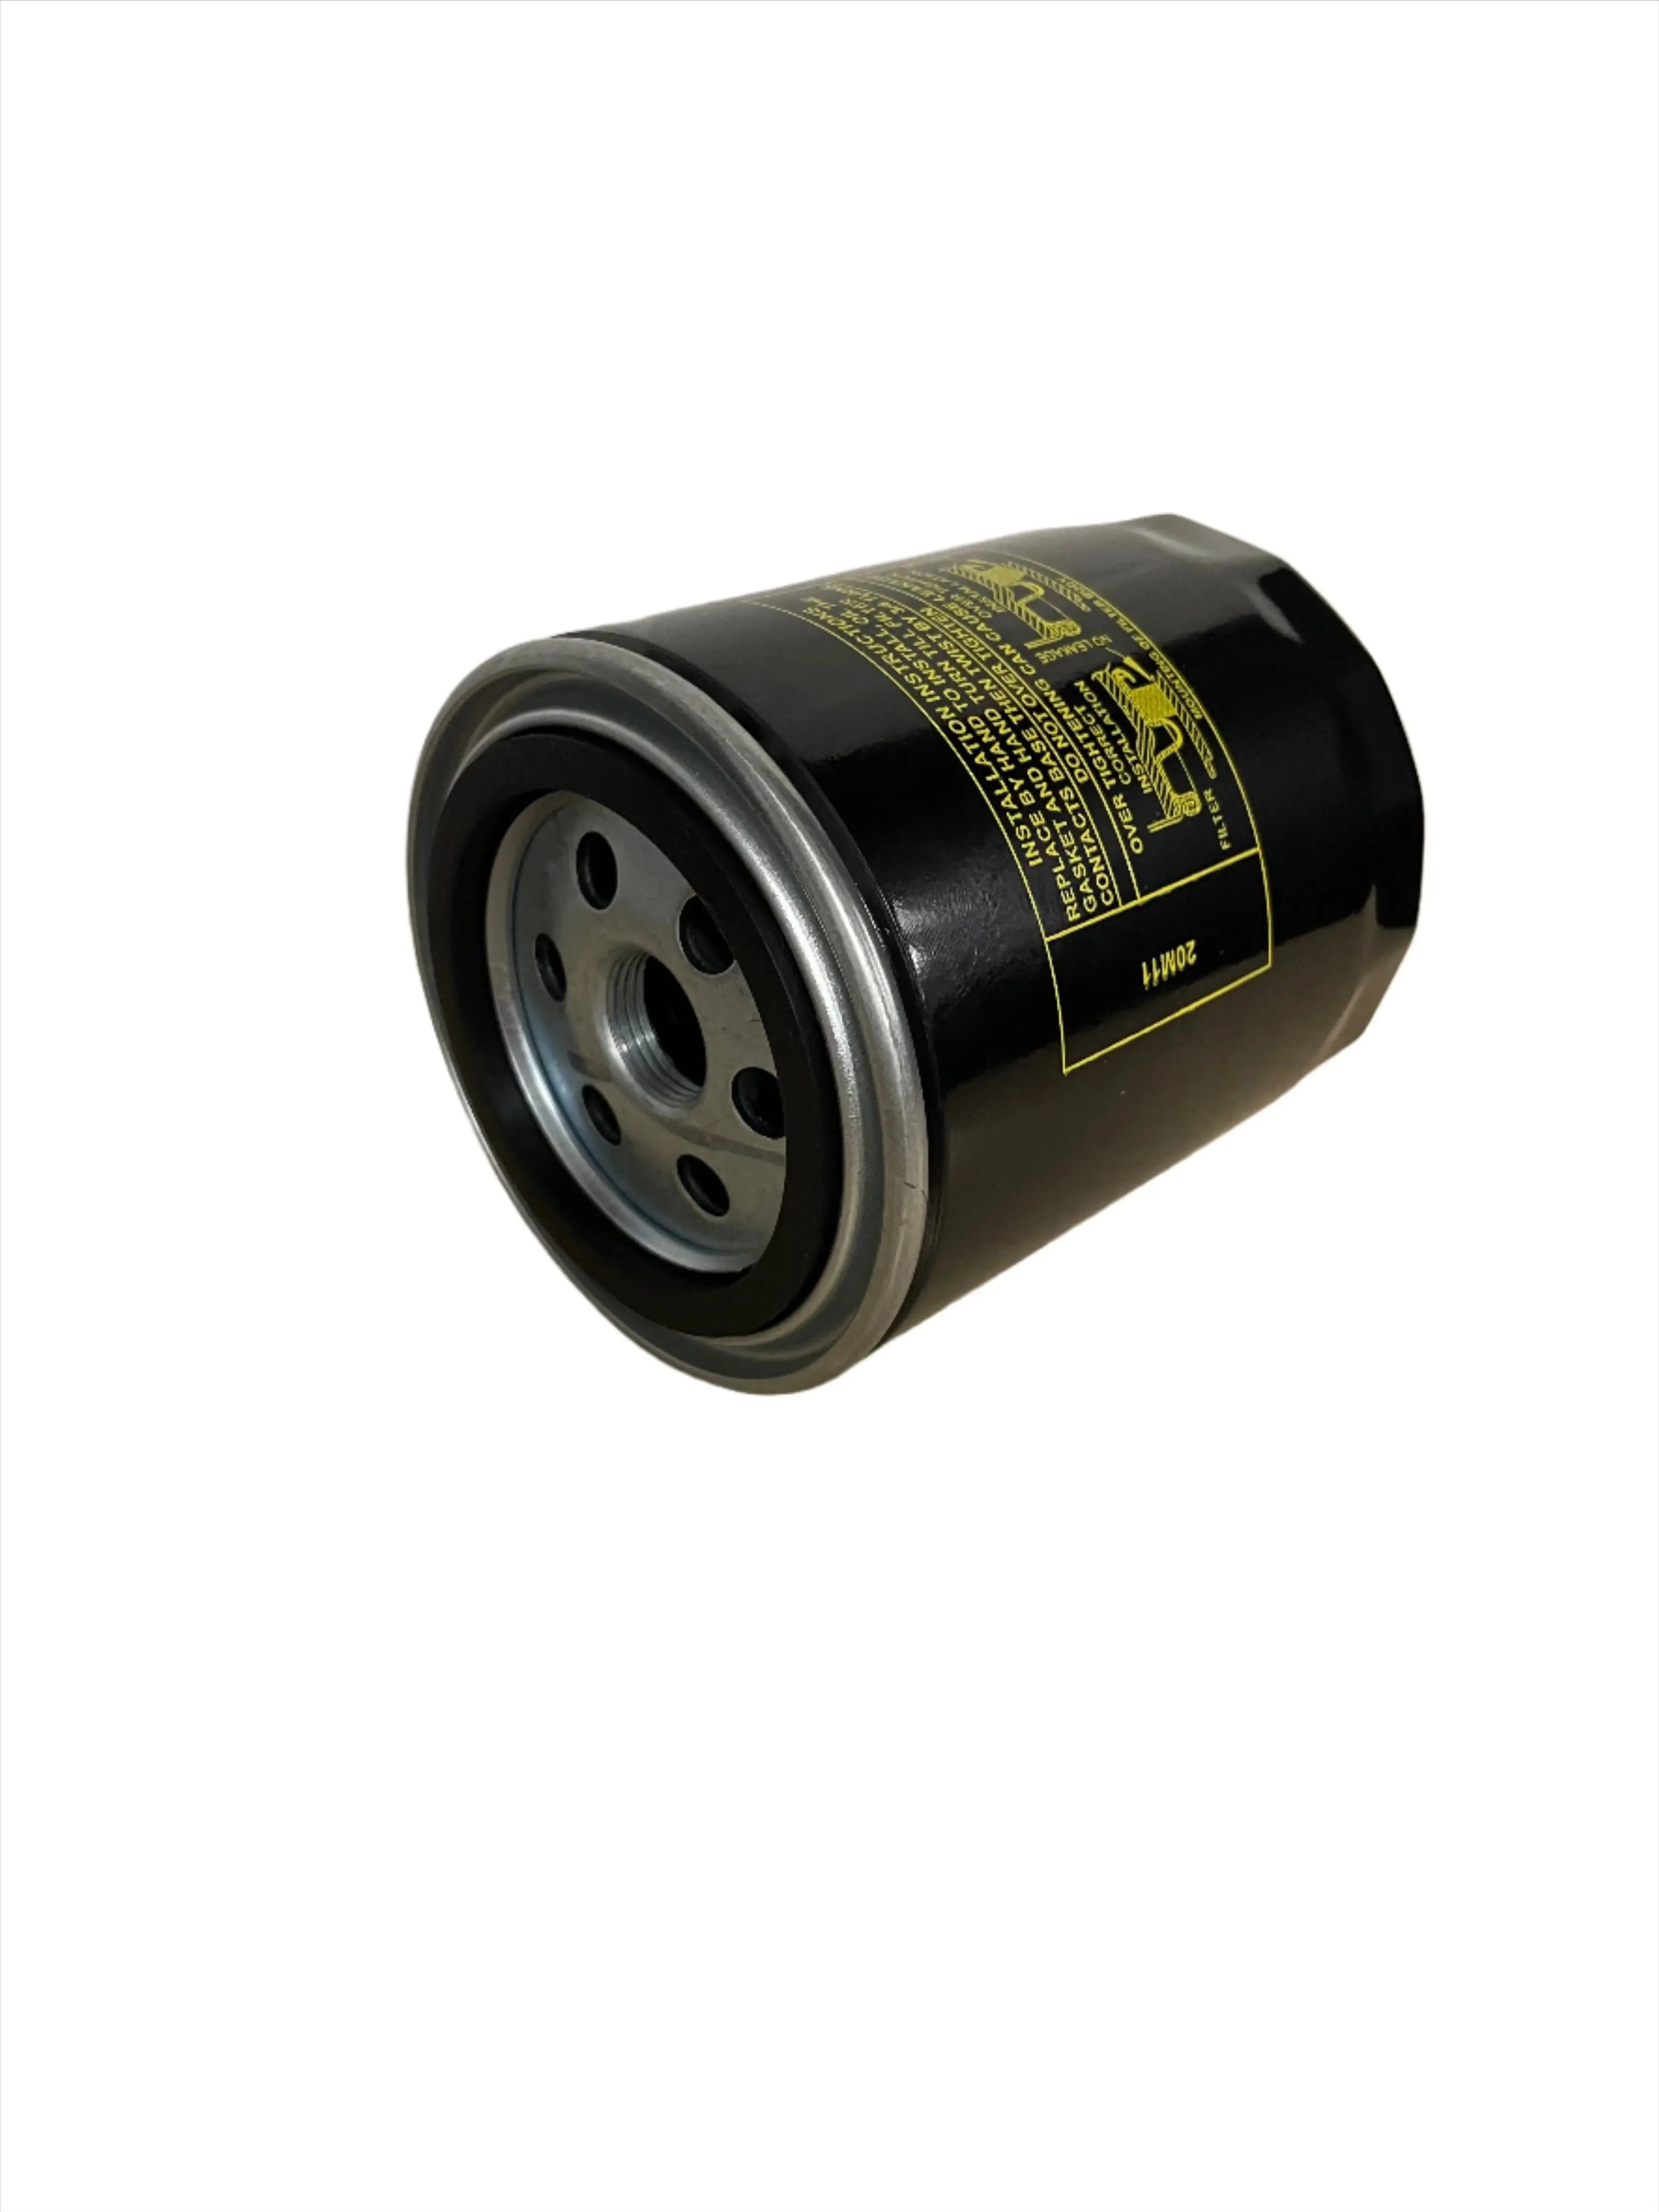 Engine Oil Filter Mahindra Tractor 2500, 2600, 6000, 5100 Series - [sku] - Roxor Parts Direct